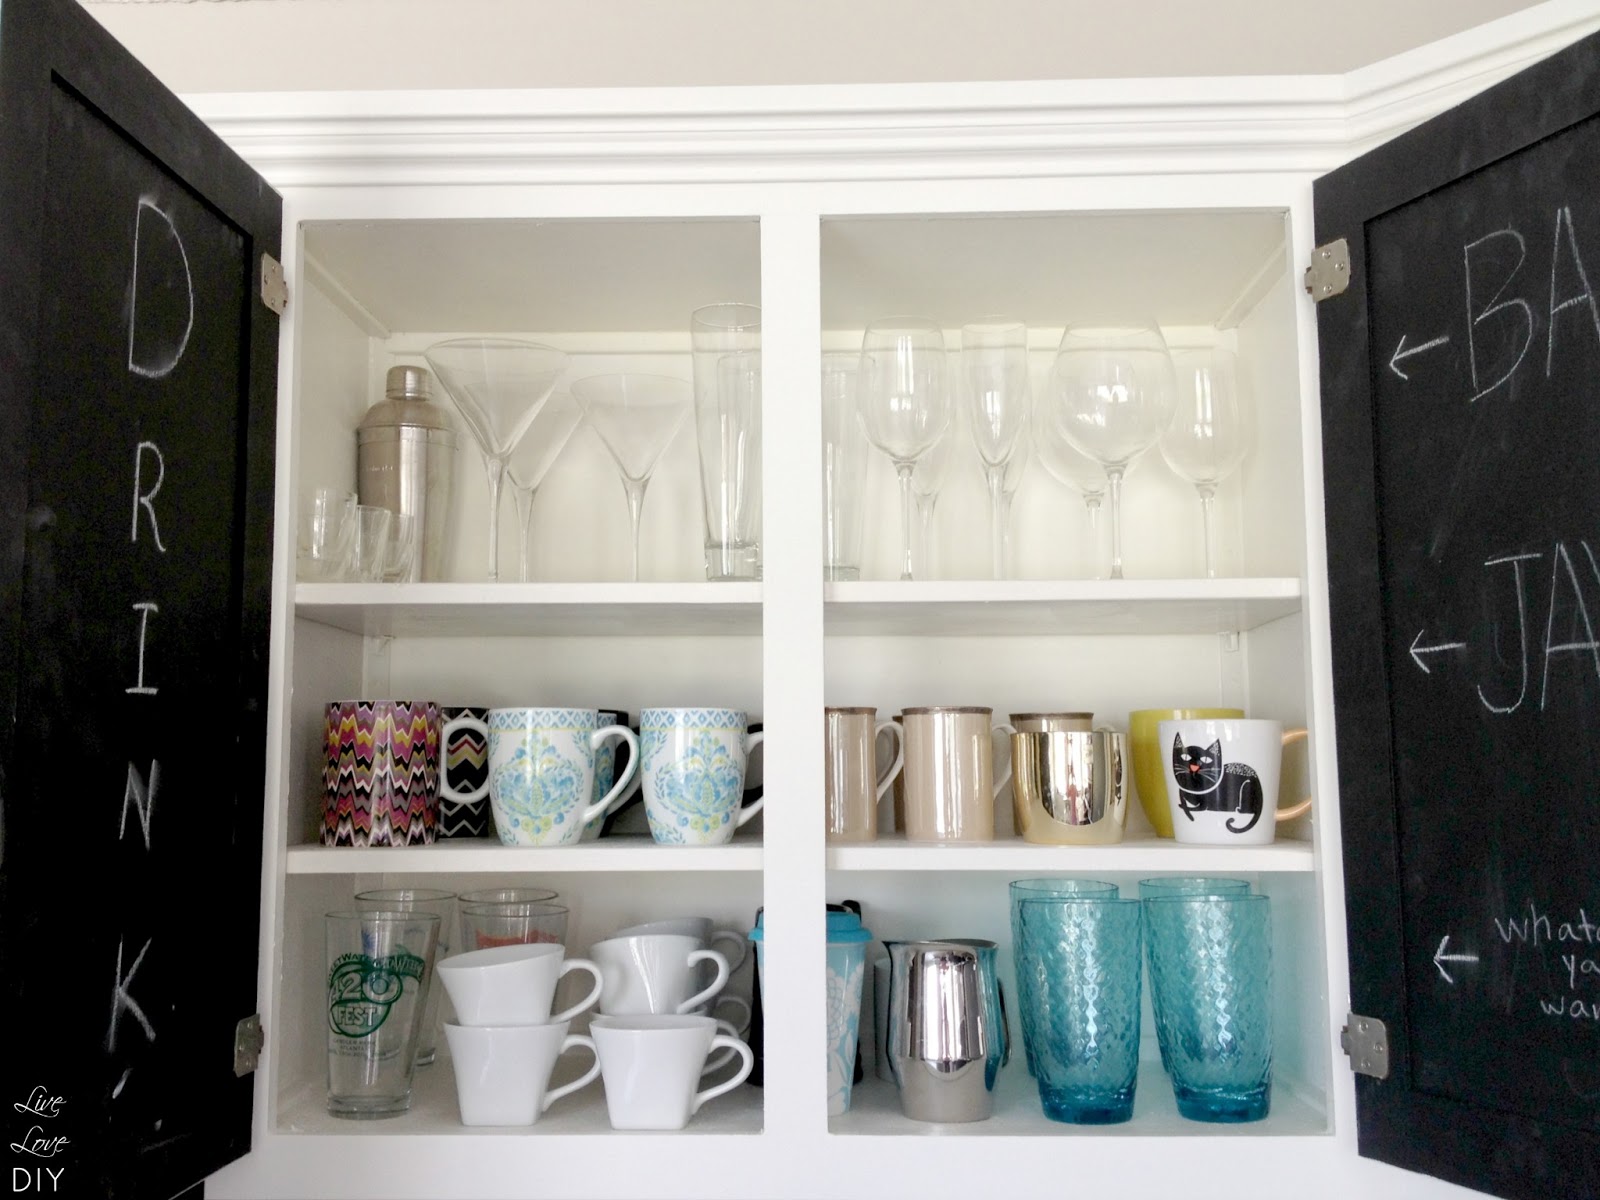 Tips for Painting Kitchen Cabinet Shelves